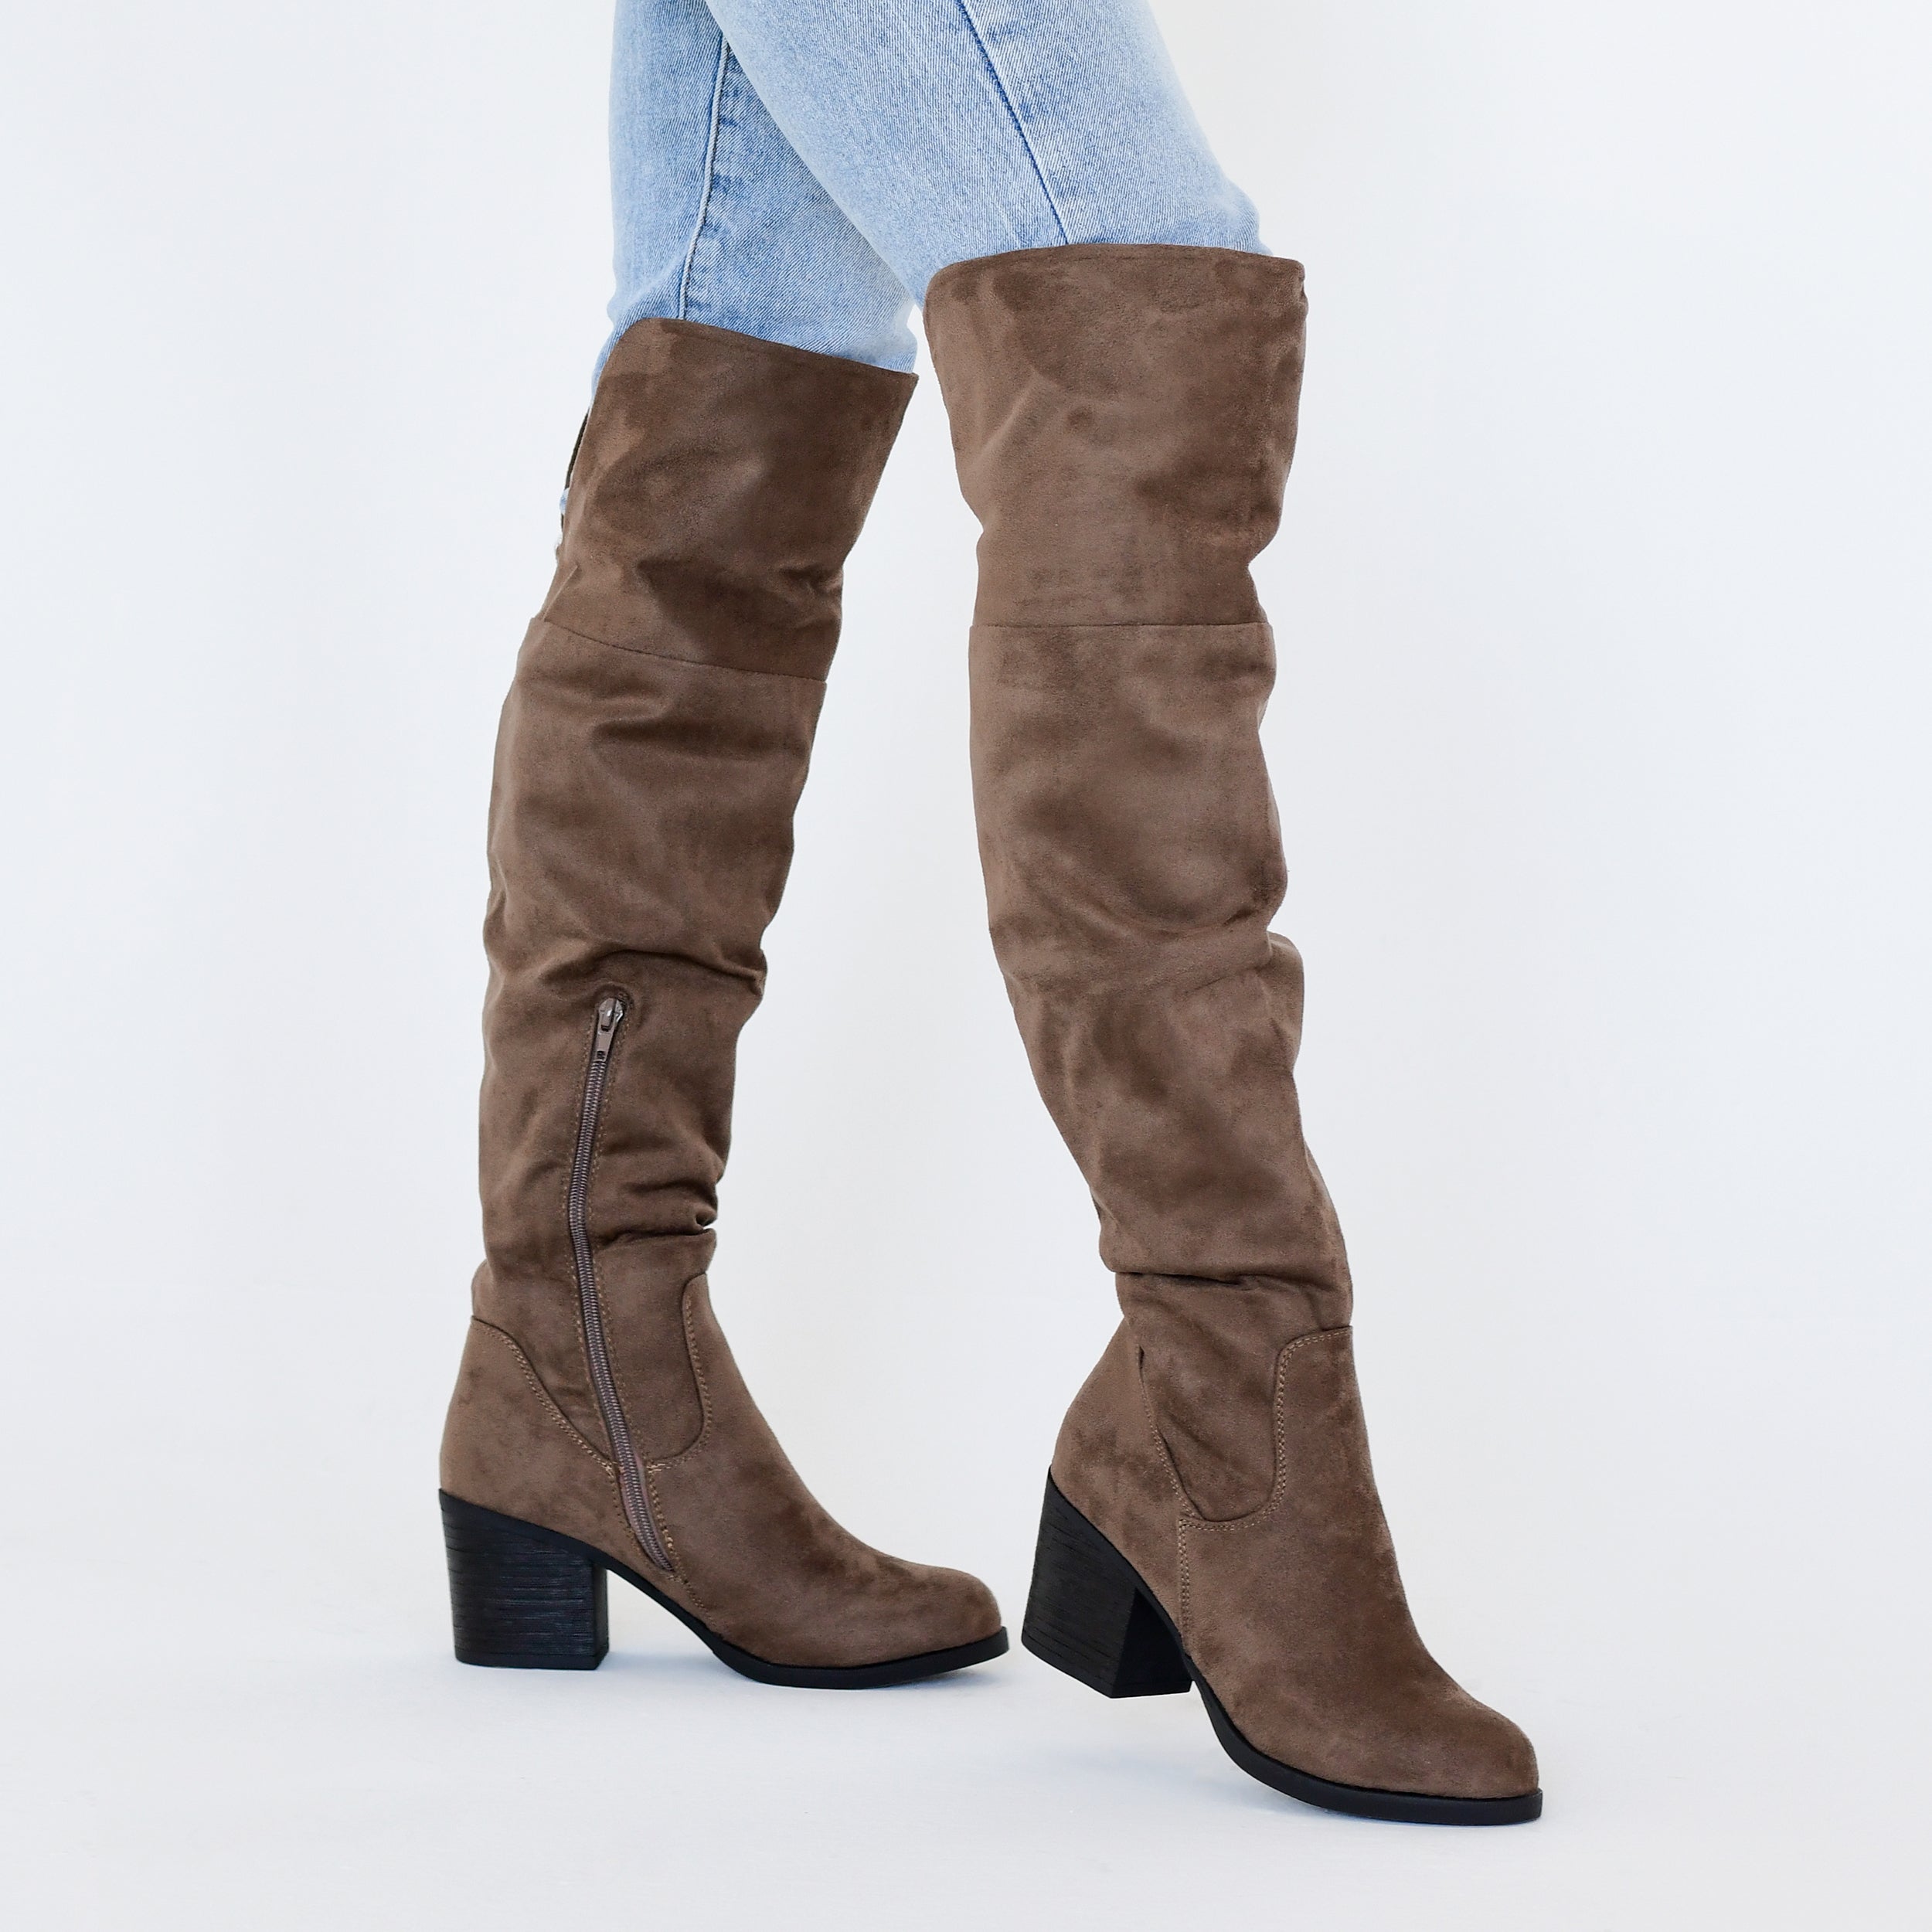 Sana Boot | Women\'s Over The Knee Boots | Journee Collection | Boots